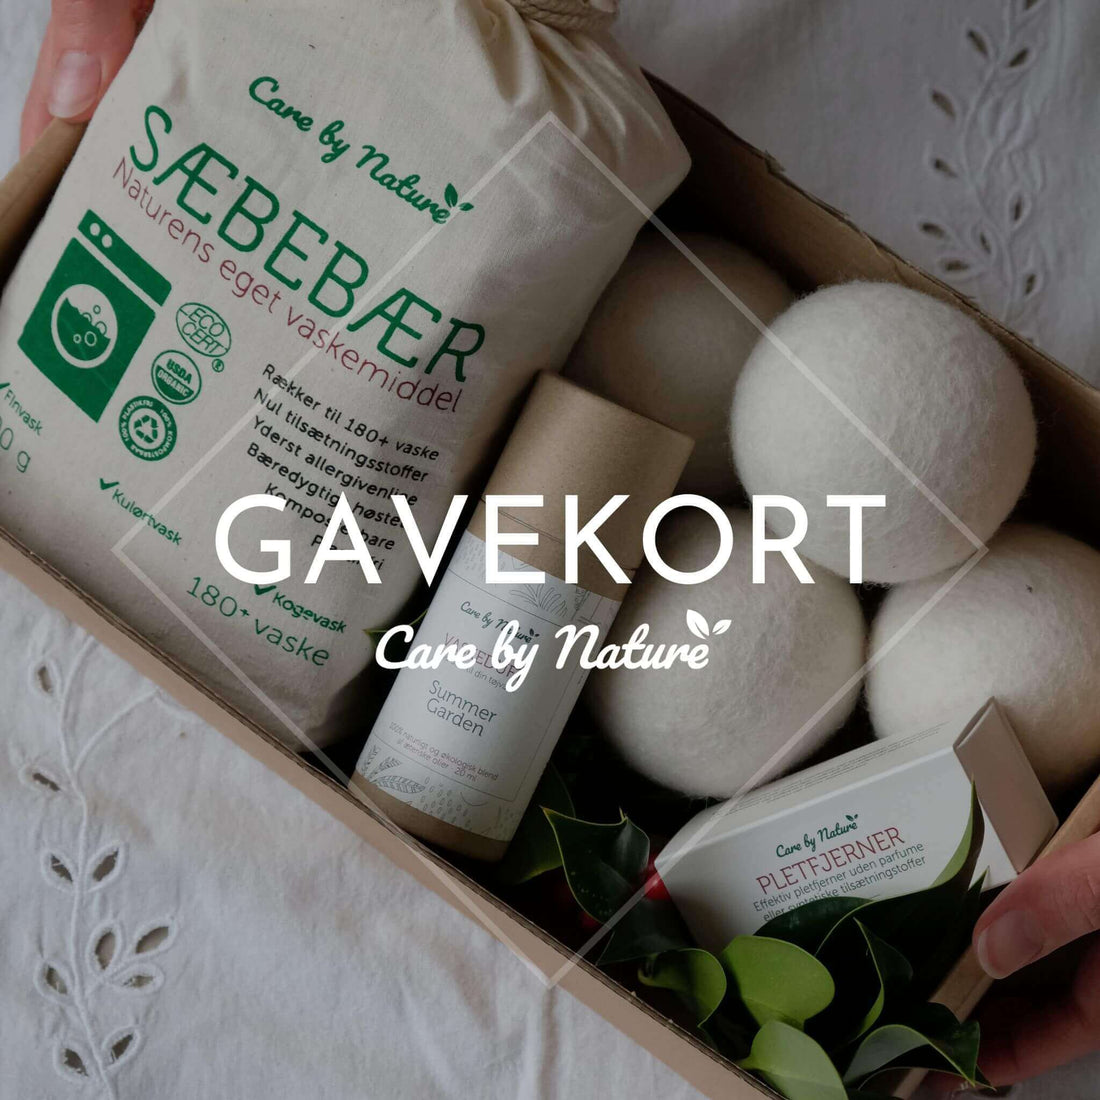 Care by Nature gavekort